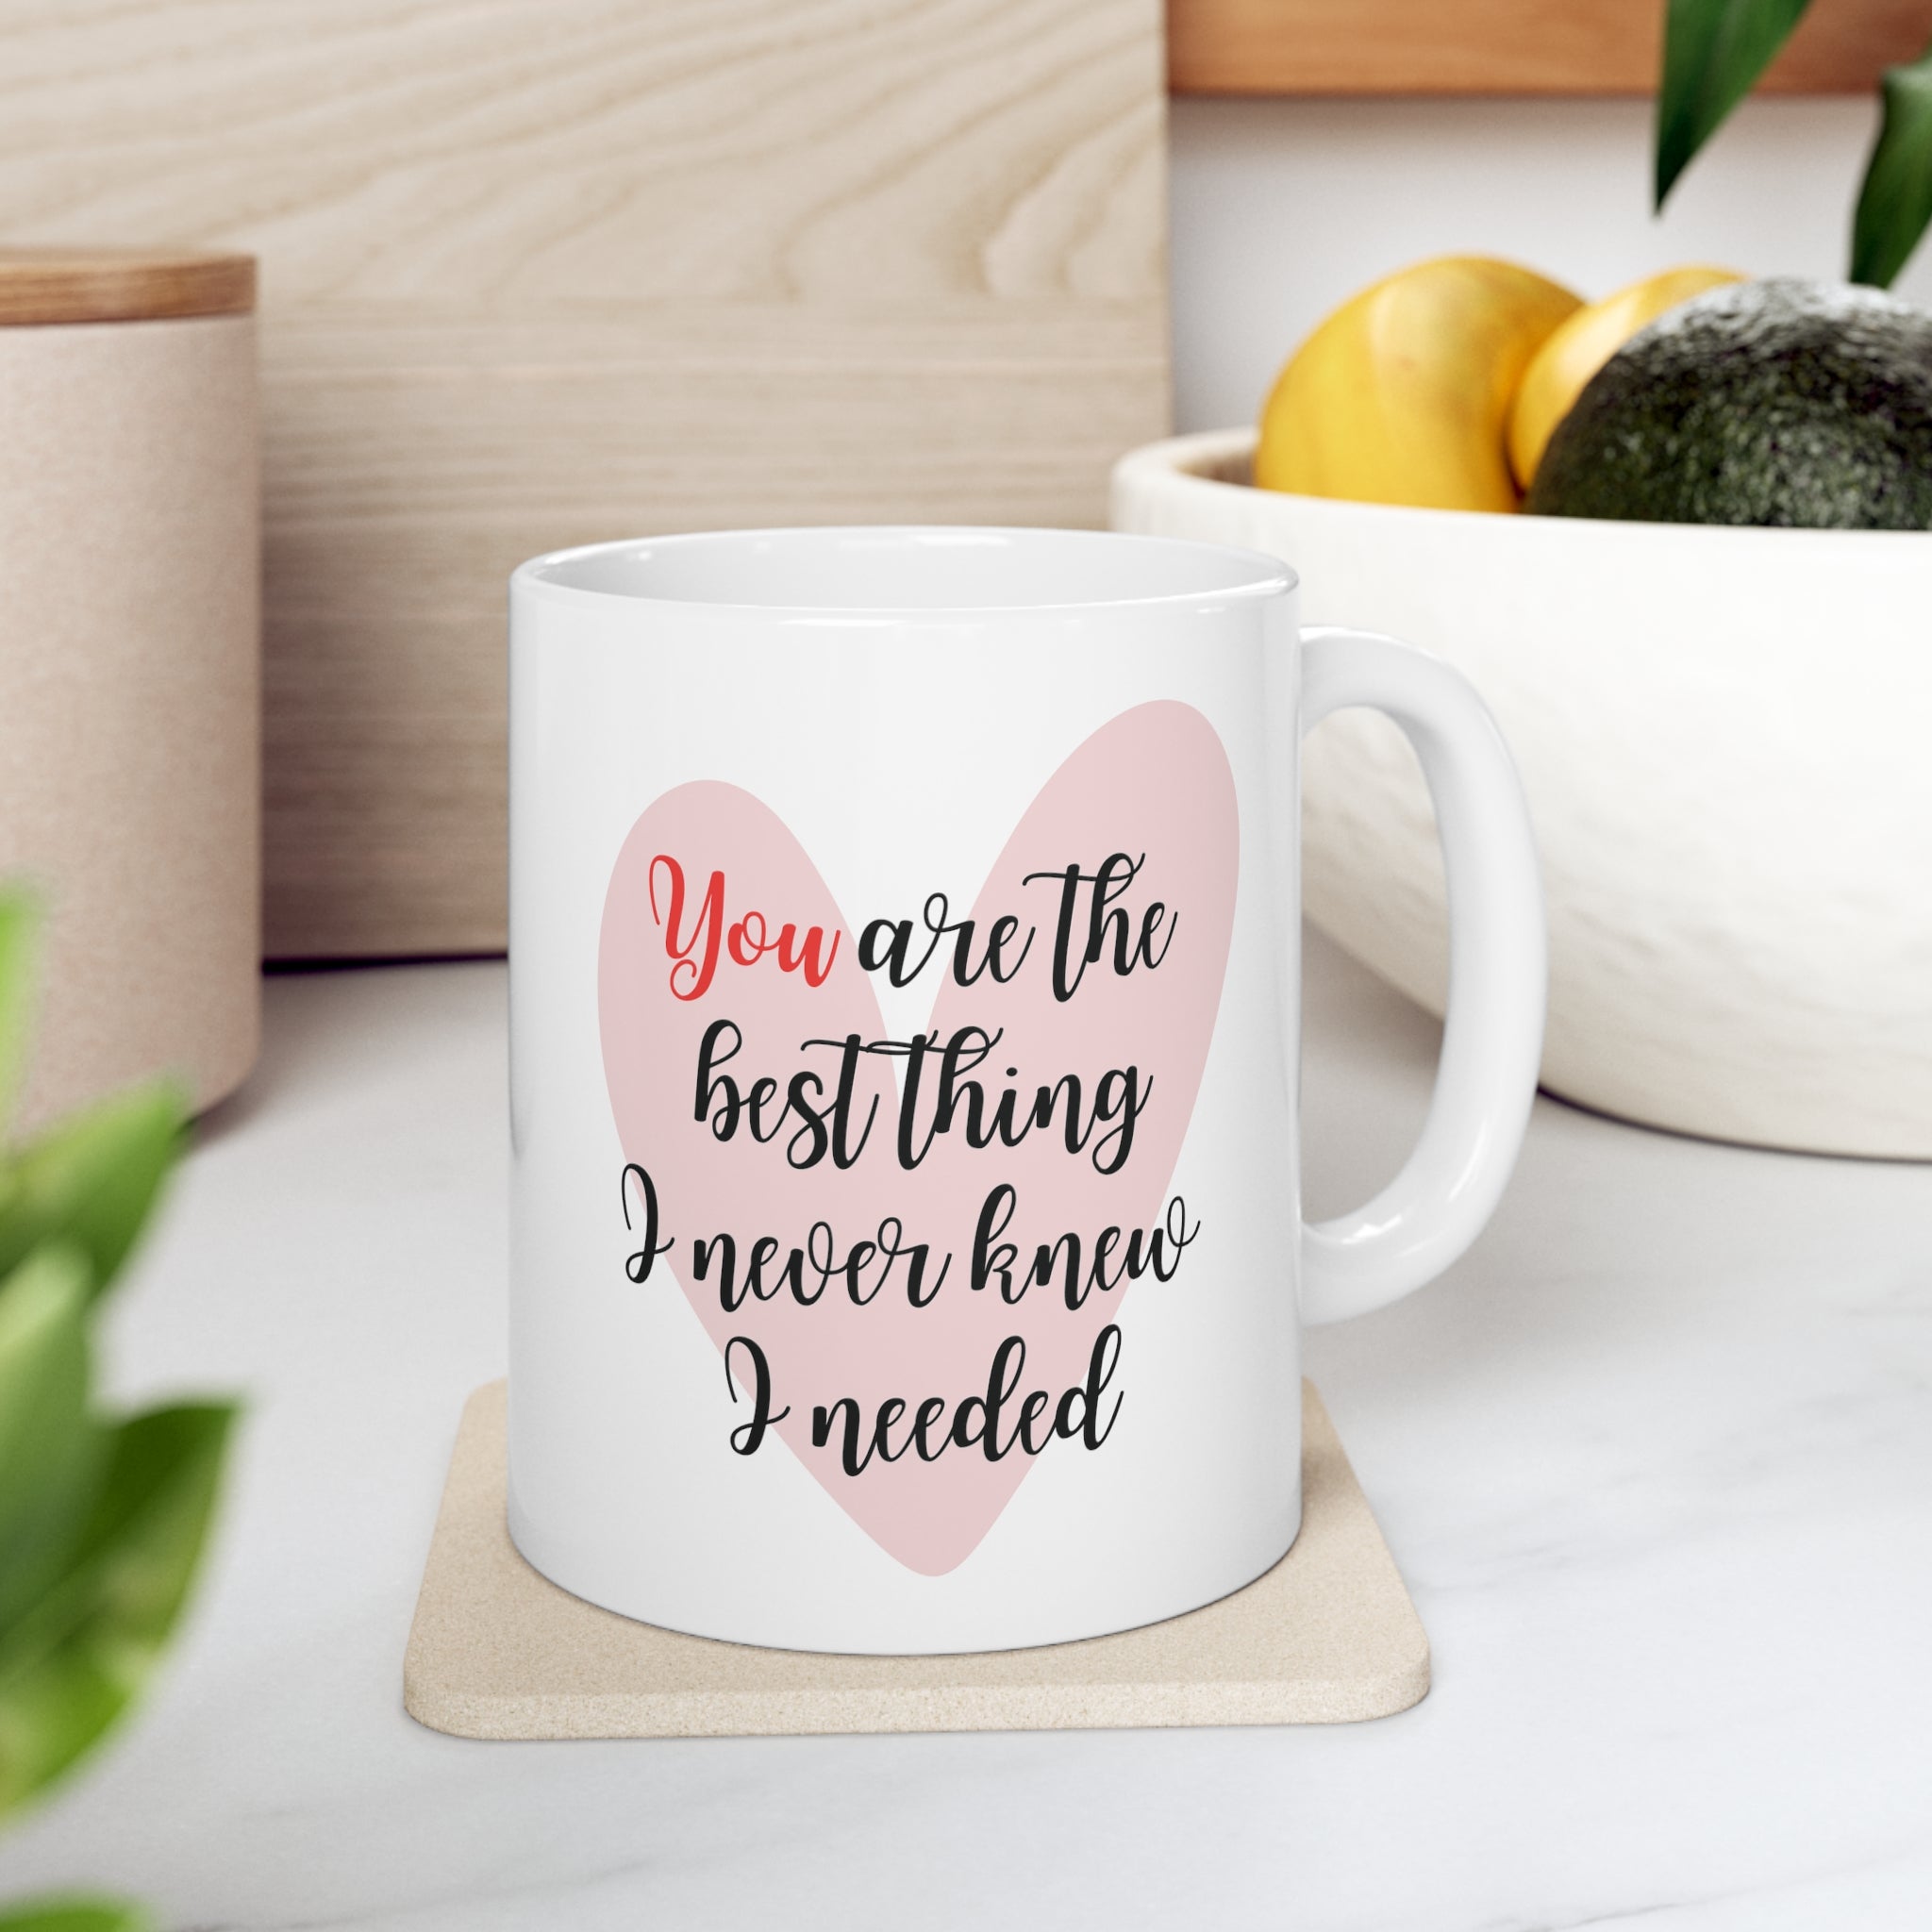 Heart Background Mug | 'You Are the Best Thing' | 11oz Ceramic Coffee Cup | Valentine's Day Gift, Wedding Gift or Anniversary Gift